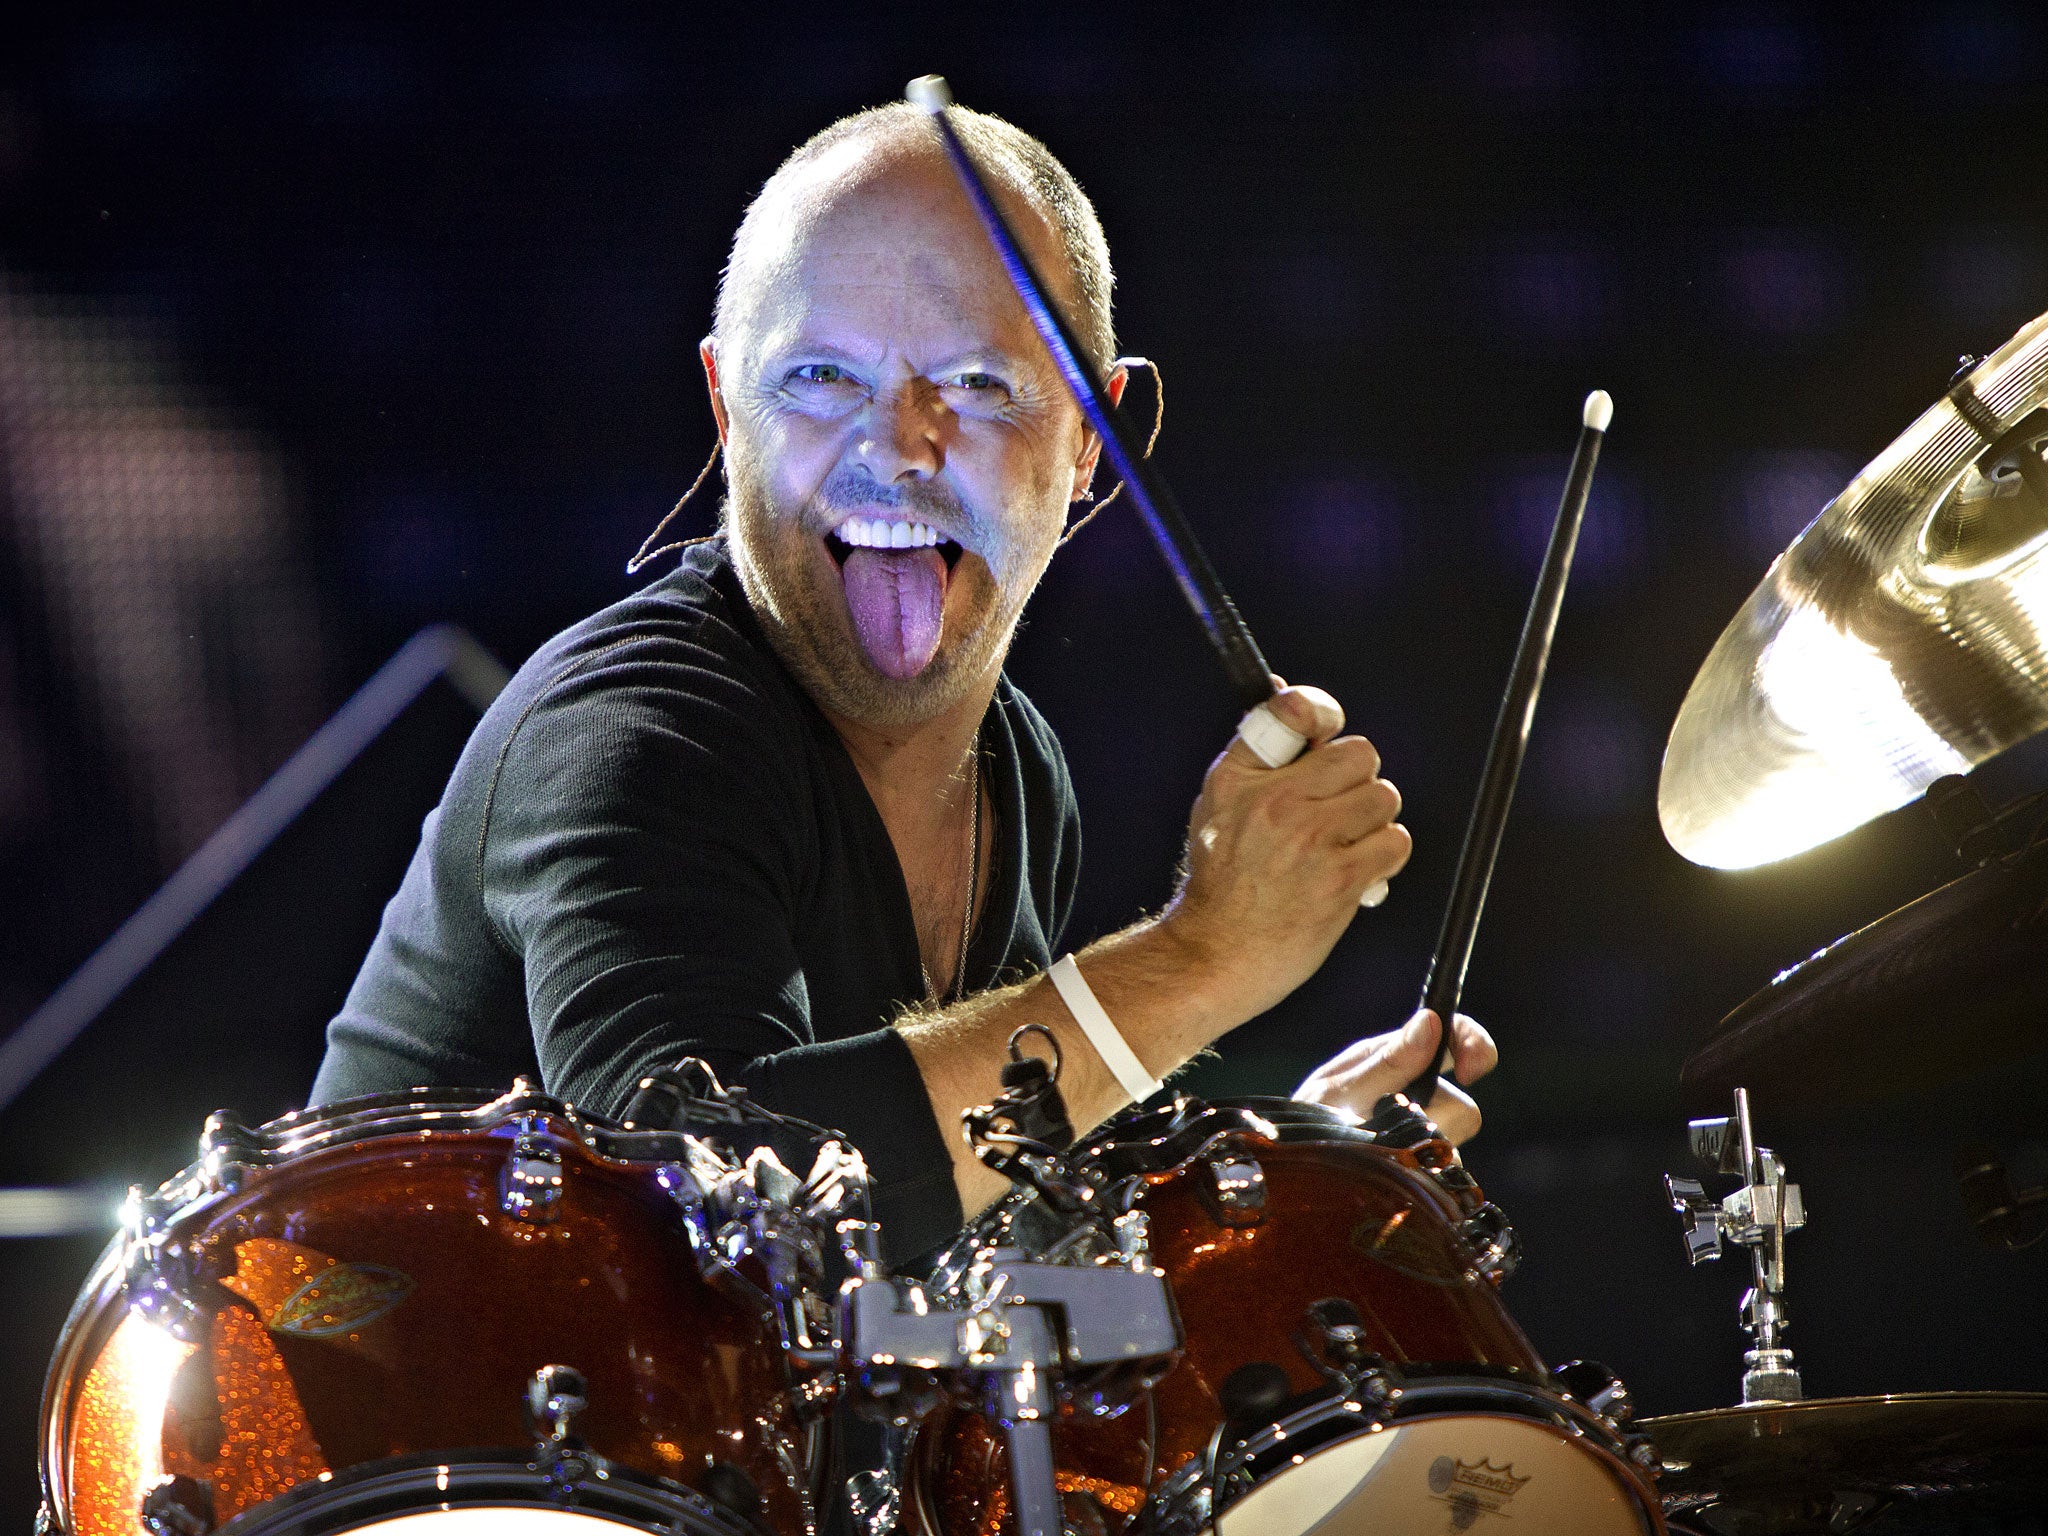 Metallica drummer Lars Ulrich has taken issue with people thinking metal fans are 'lower class'